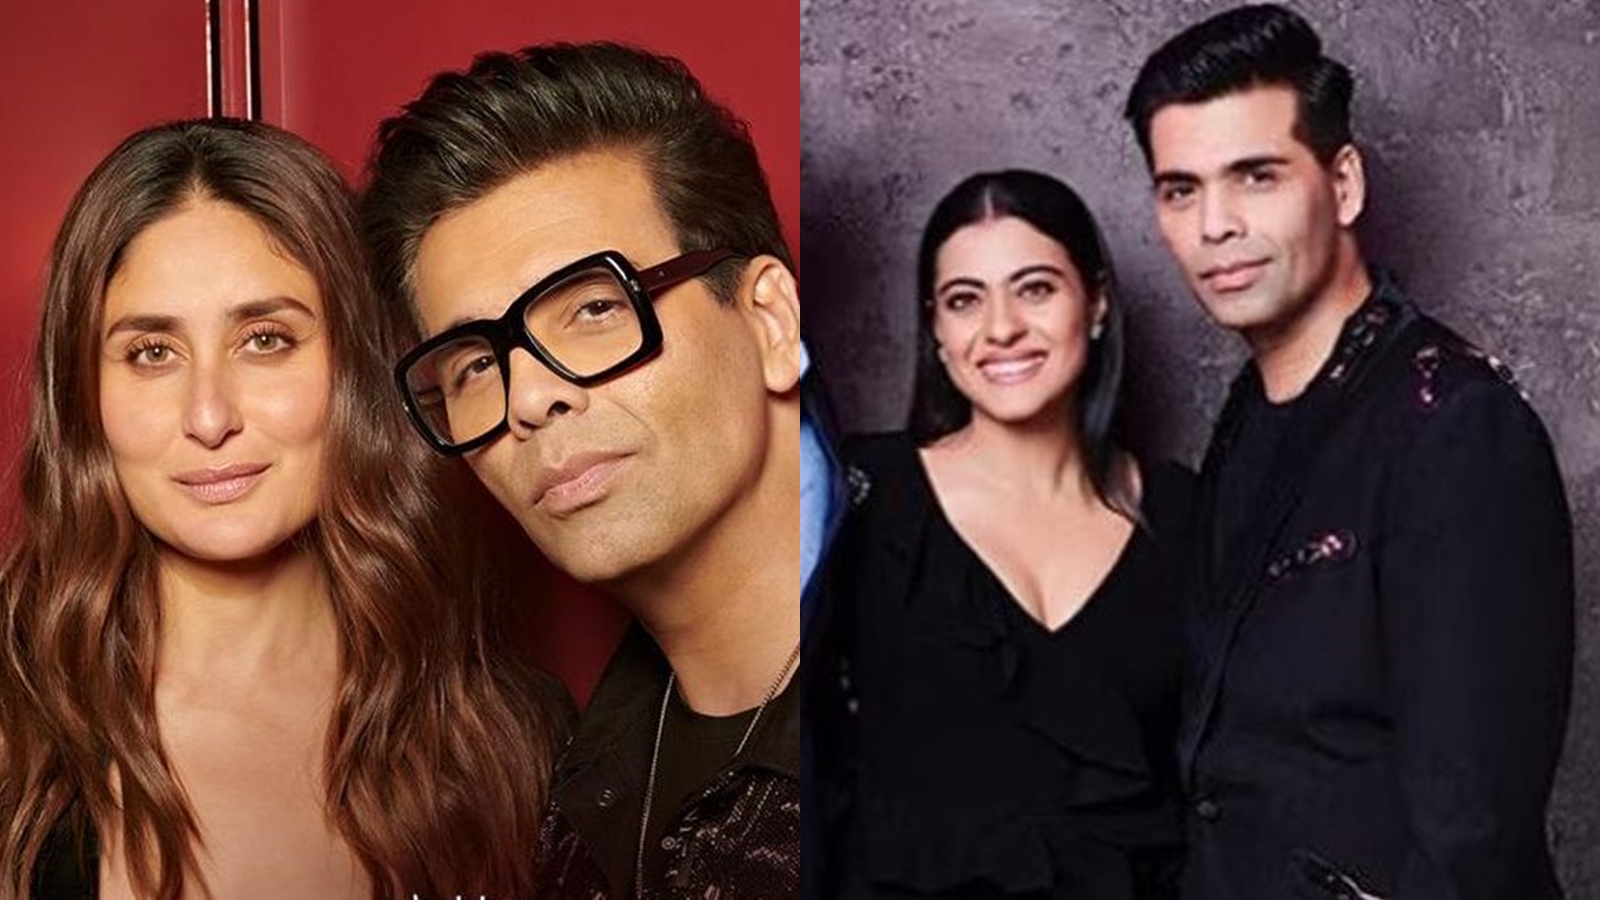 Kareena Kapoor Ka Xxnx Video - Karan Johar recalls time when he stopped speaking to Kareena Kapoor, how he  ended fued with Kajol: 'After my dad was diagnosed with cancerâ€¦' |  Bollywood News - The Indian Express